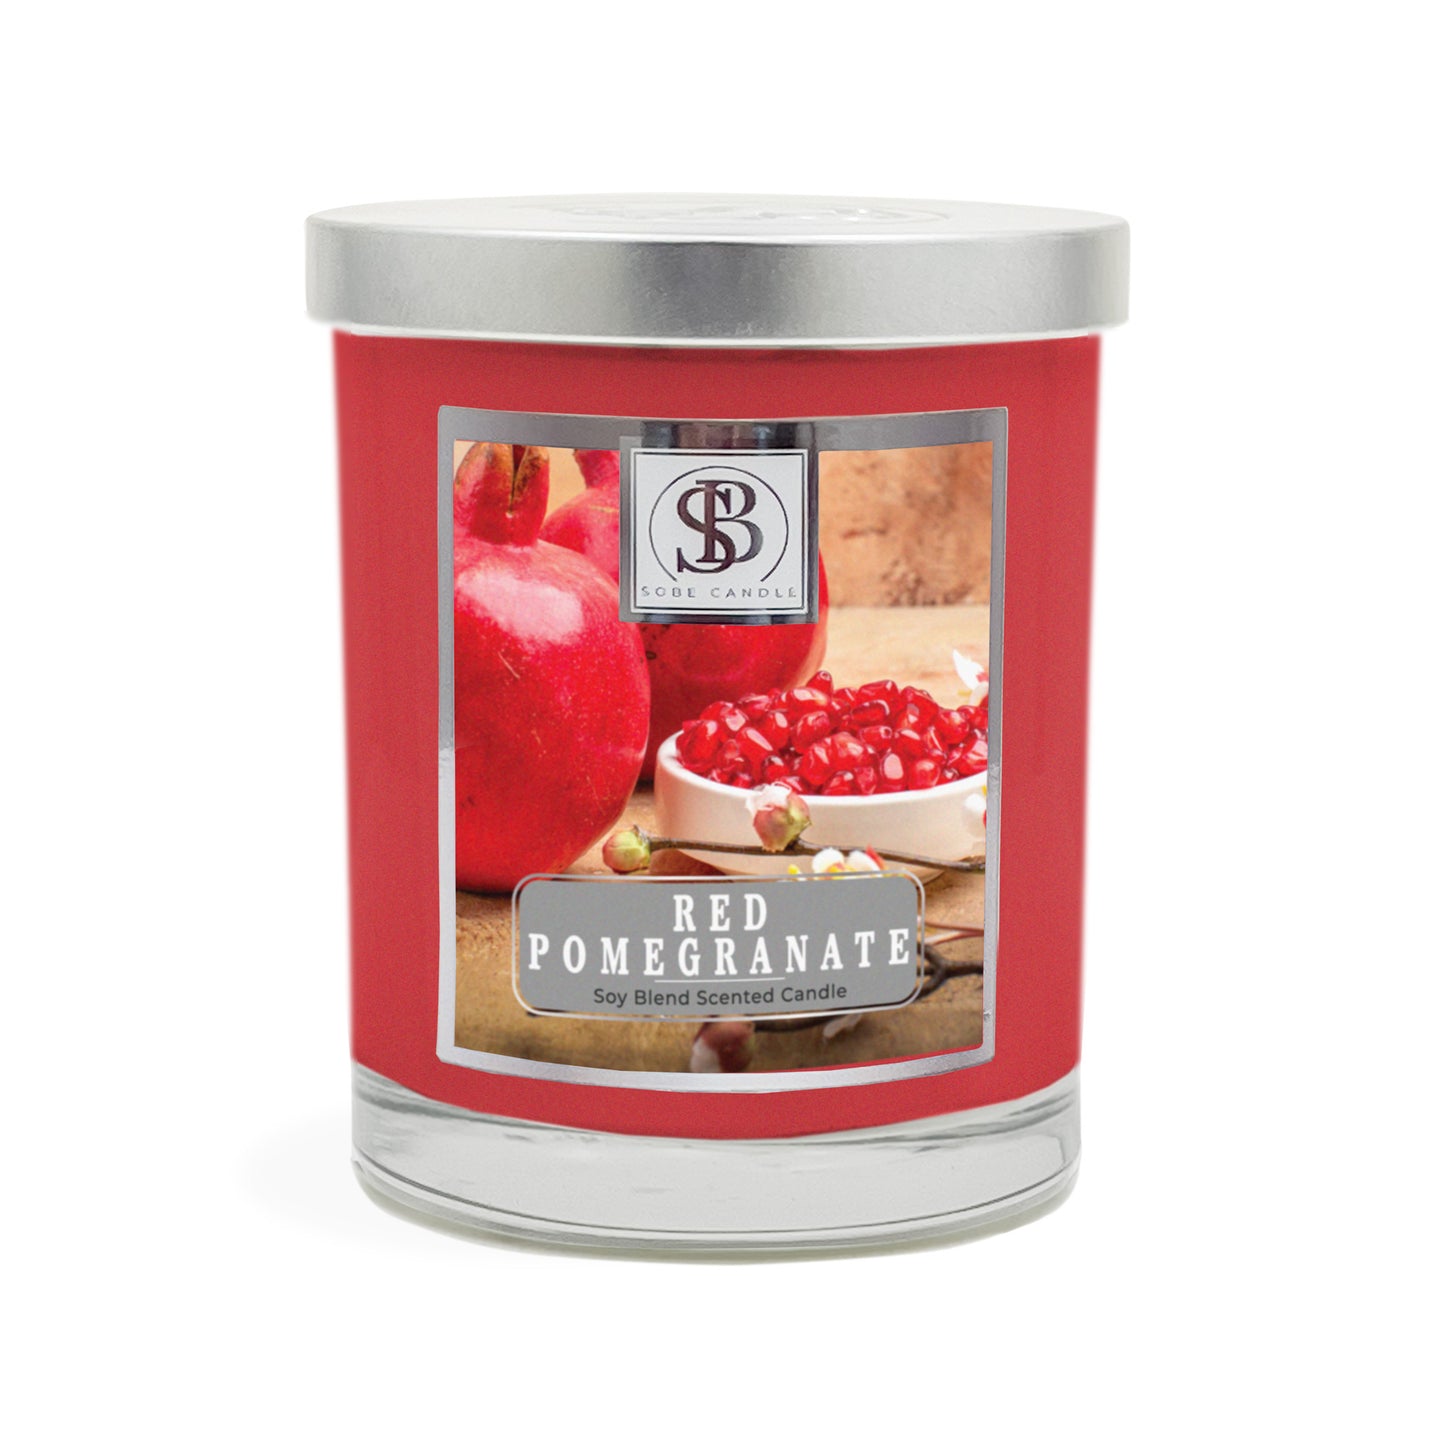 RED POMEGRANATE | Soy Scented Candle 11 oz